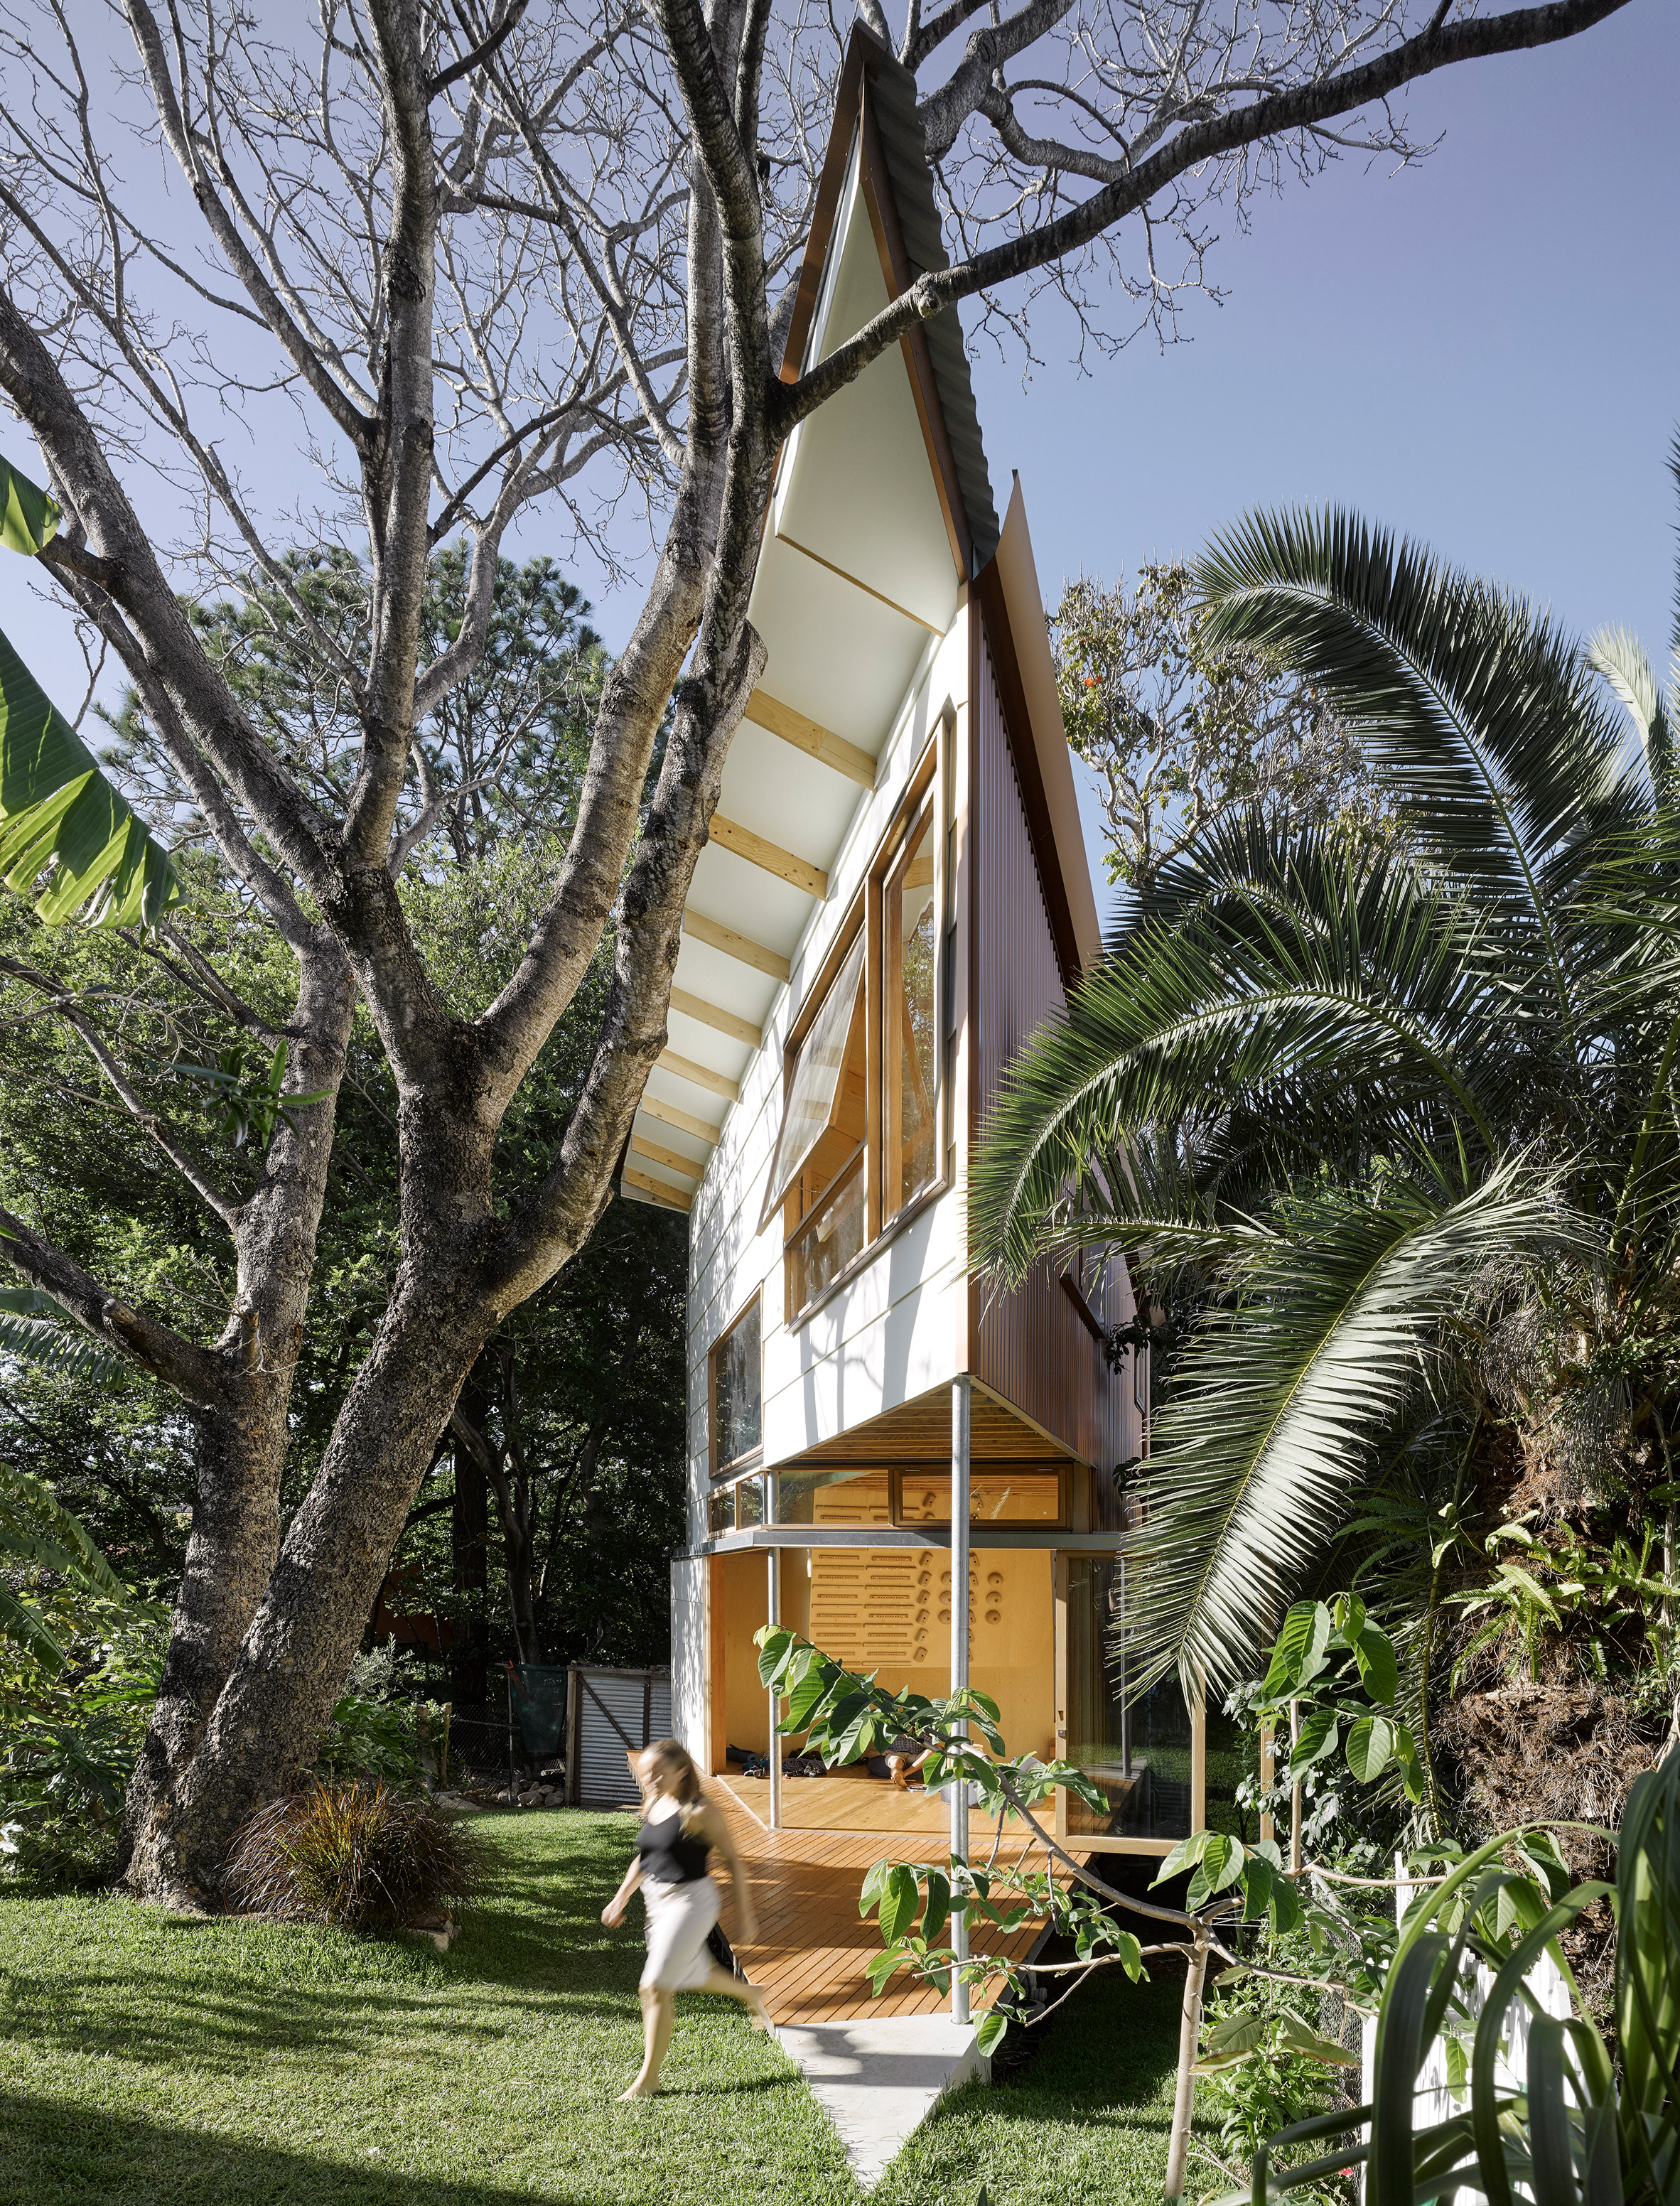 Extremely pointed garden room features a treehouse-like design and a climbing wall